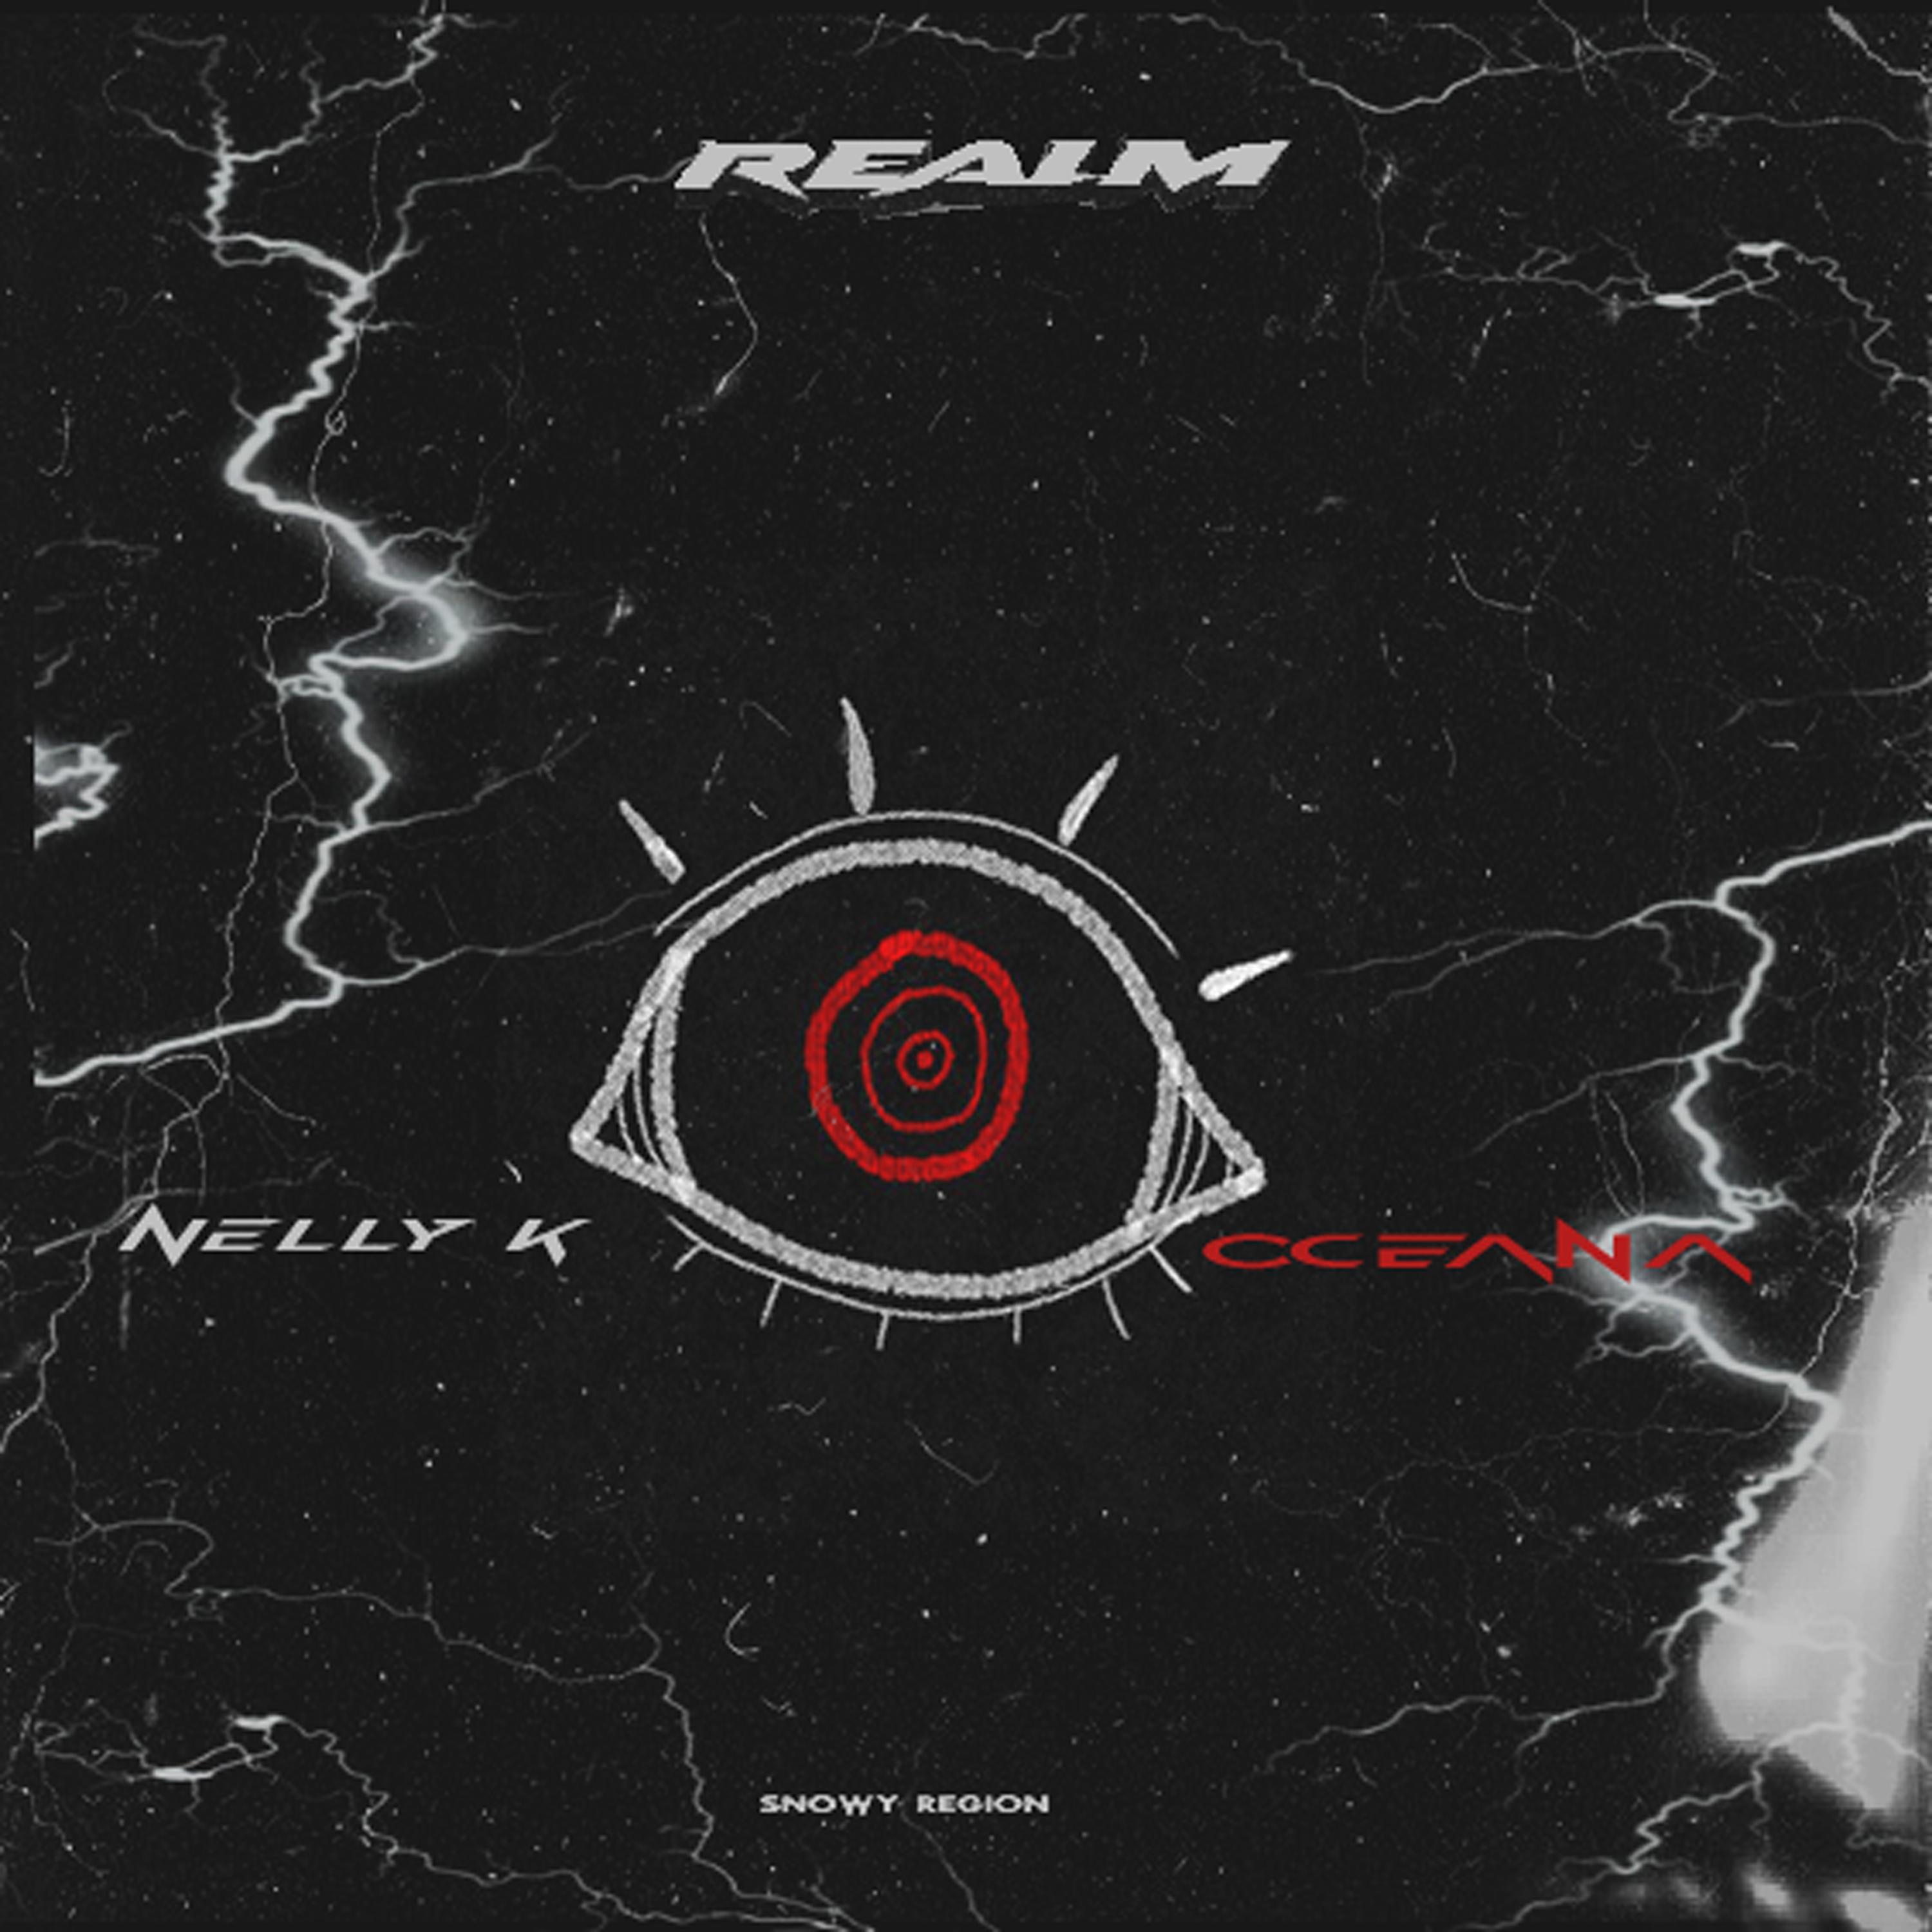 Nelly K - Realm (feat. Oceana)